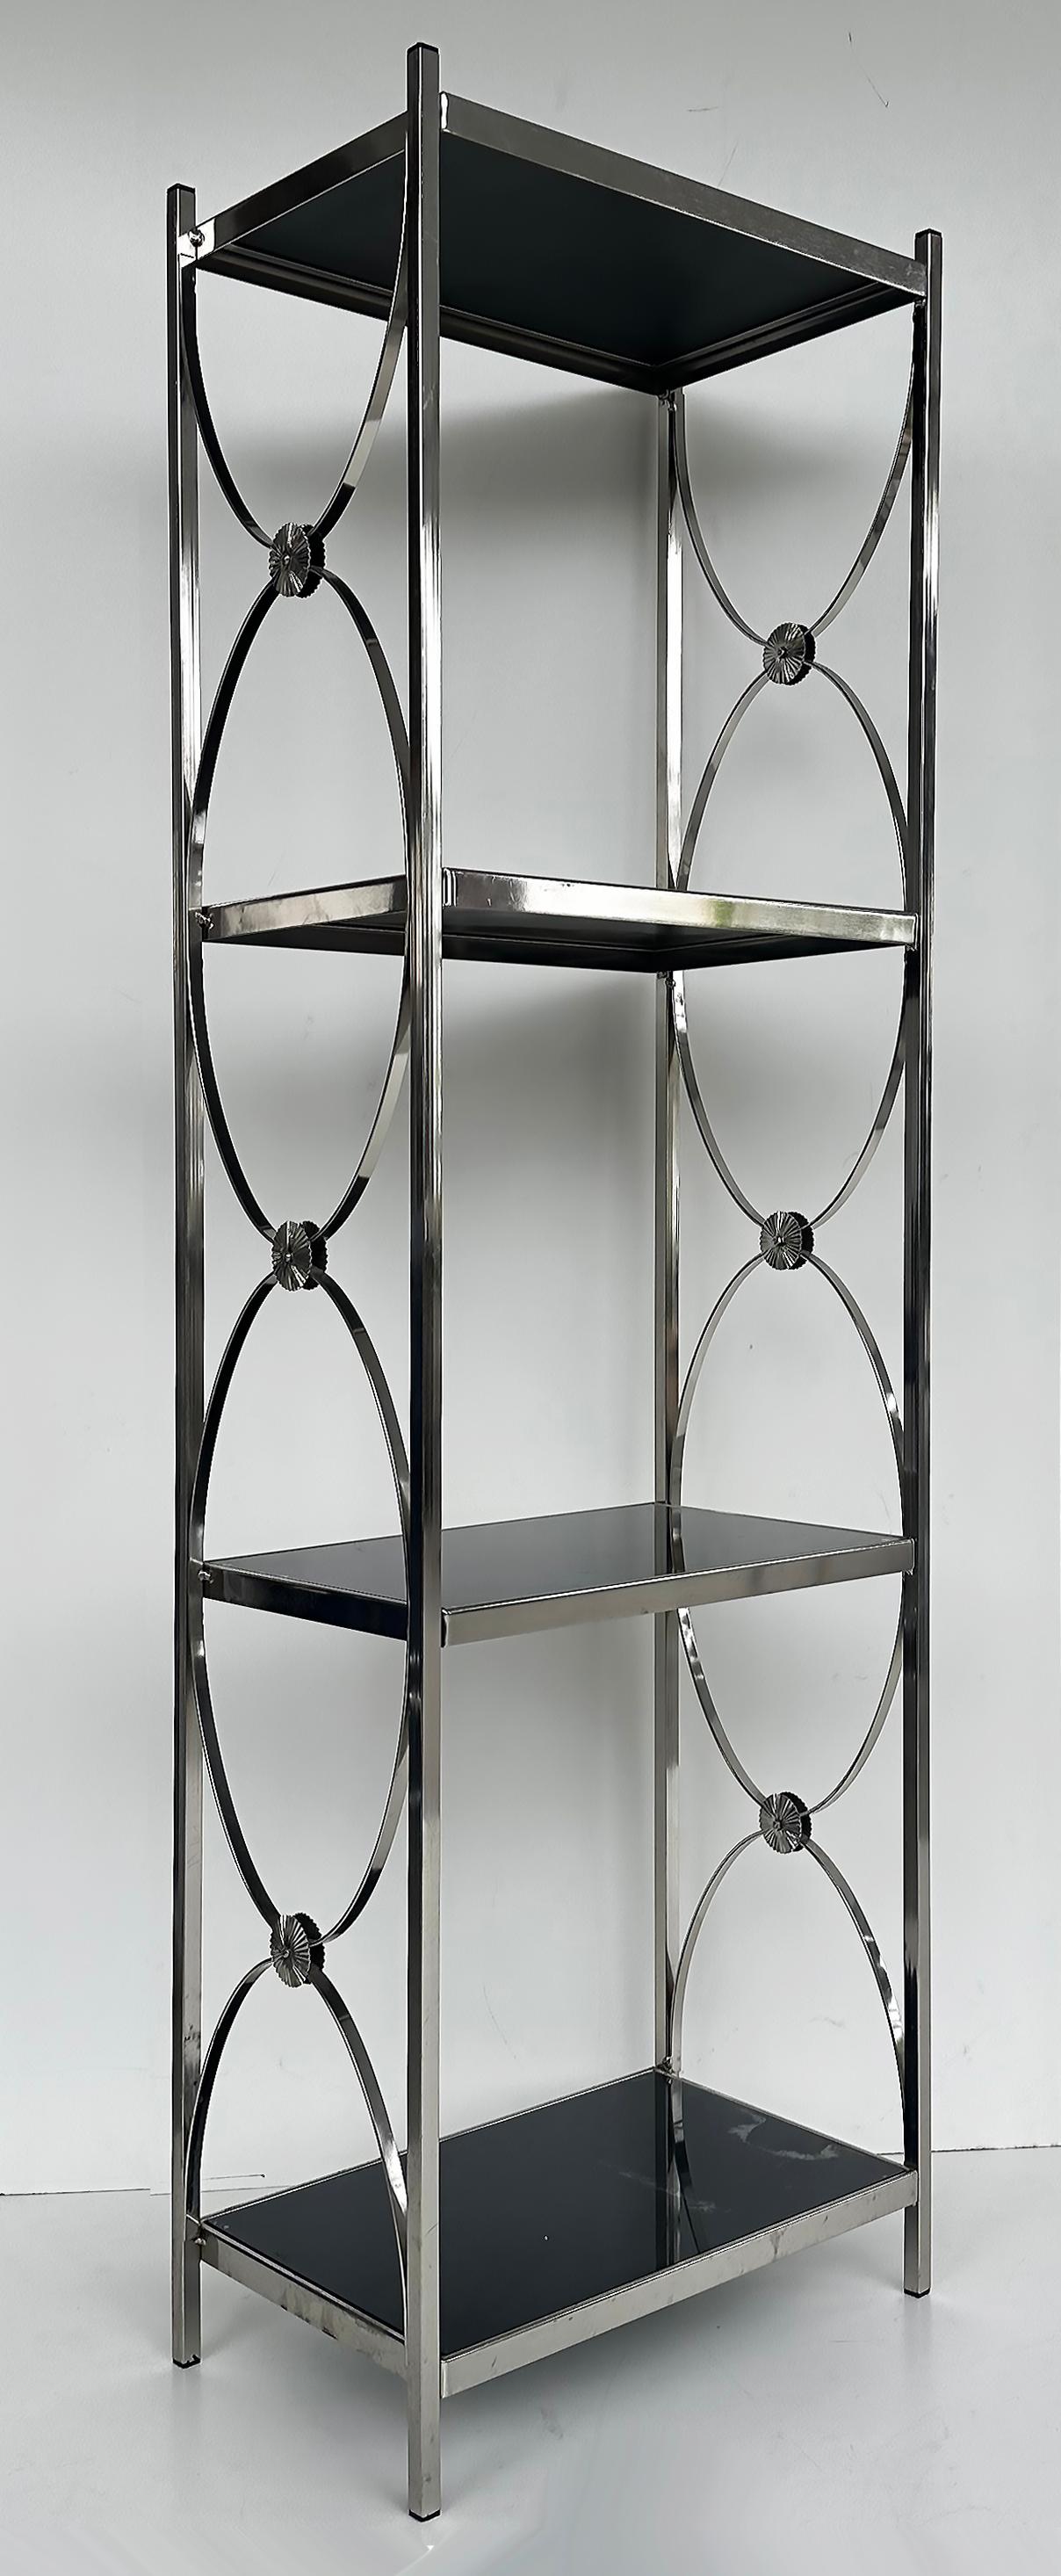 American Vintage Chrome 3-Tiered Black Glass Shelves Etagere, A Pair For Sale